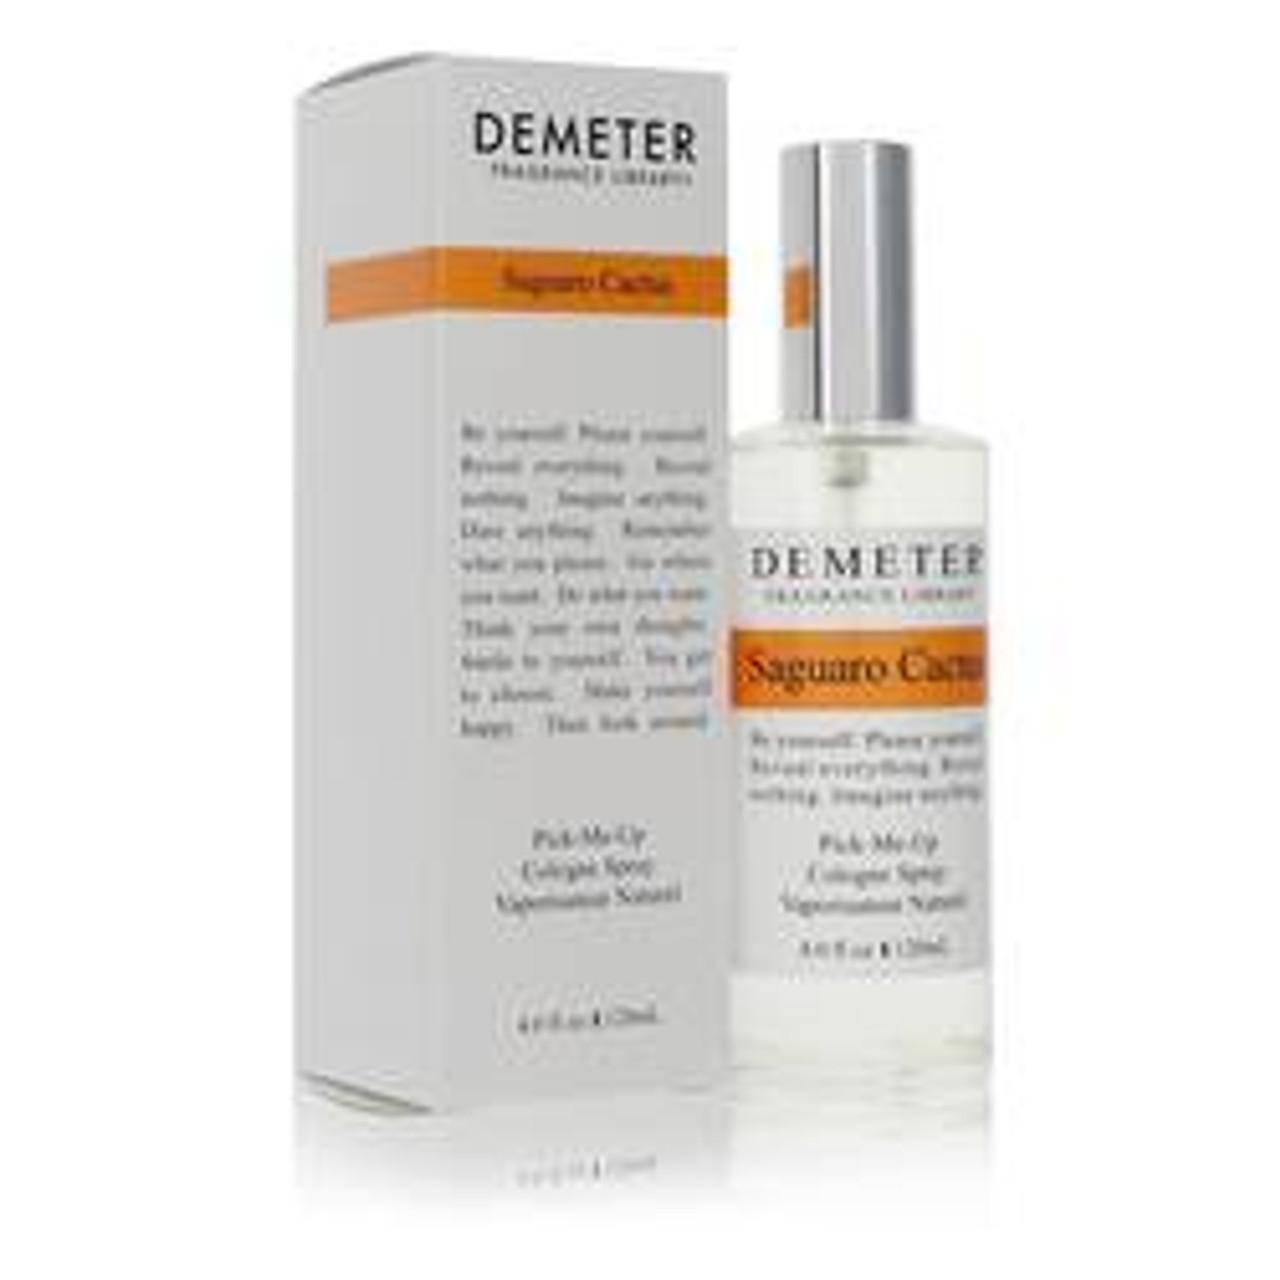 Demeter Saguaro Cactus Cologne By Demeter Cologne Spray (Unisex) 4 oz for Men - [From 79.50 - Choose pk Qty ] - *Ships from Miami